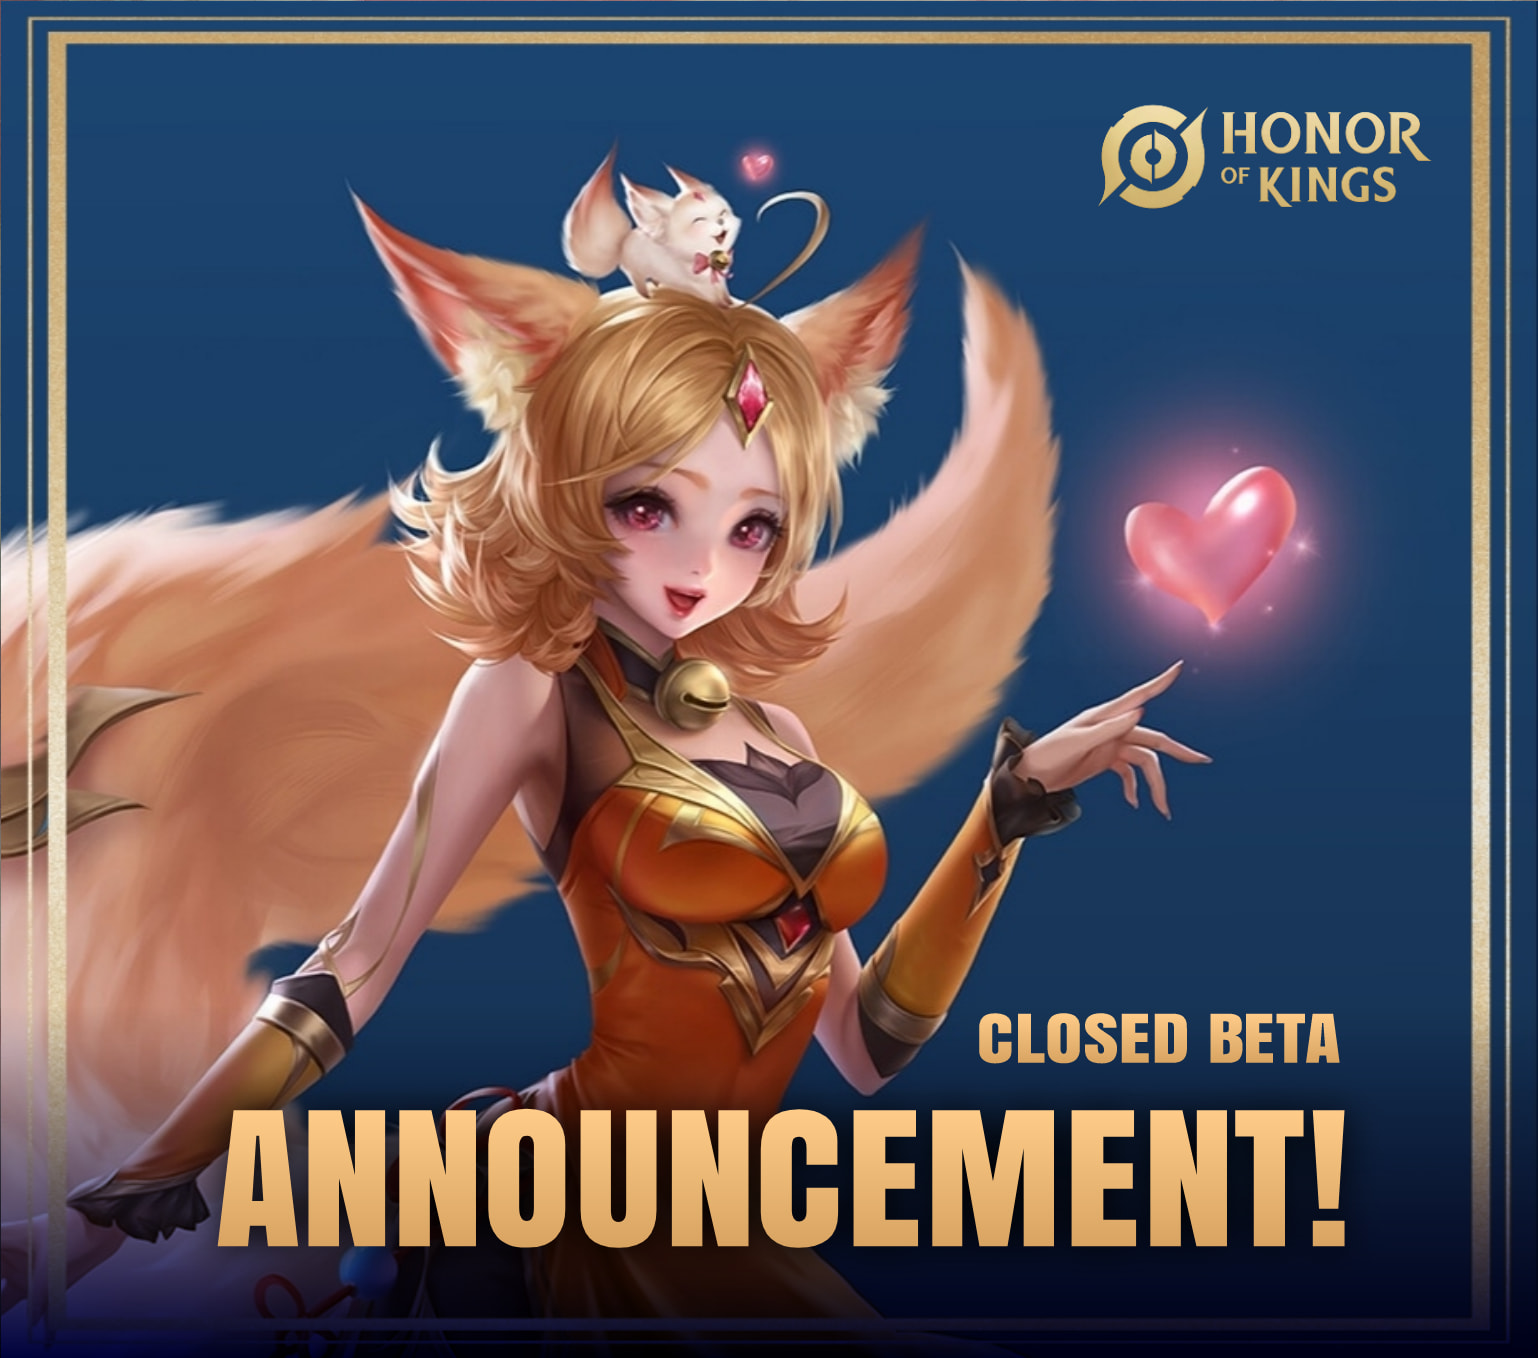 Honor of Kings to Kick off Closed Beta Tests in Brazil, Egypt